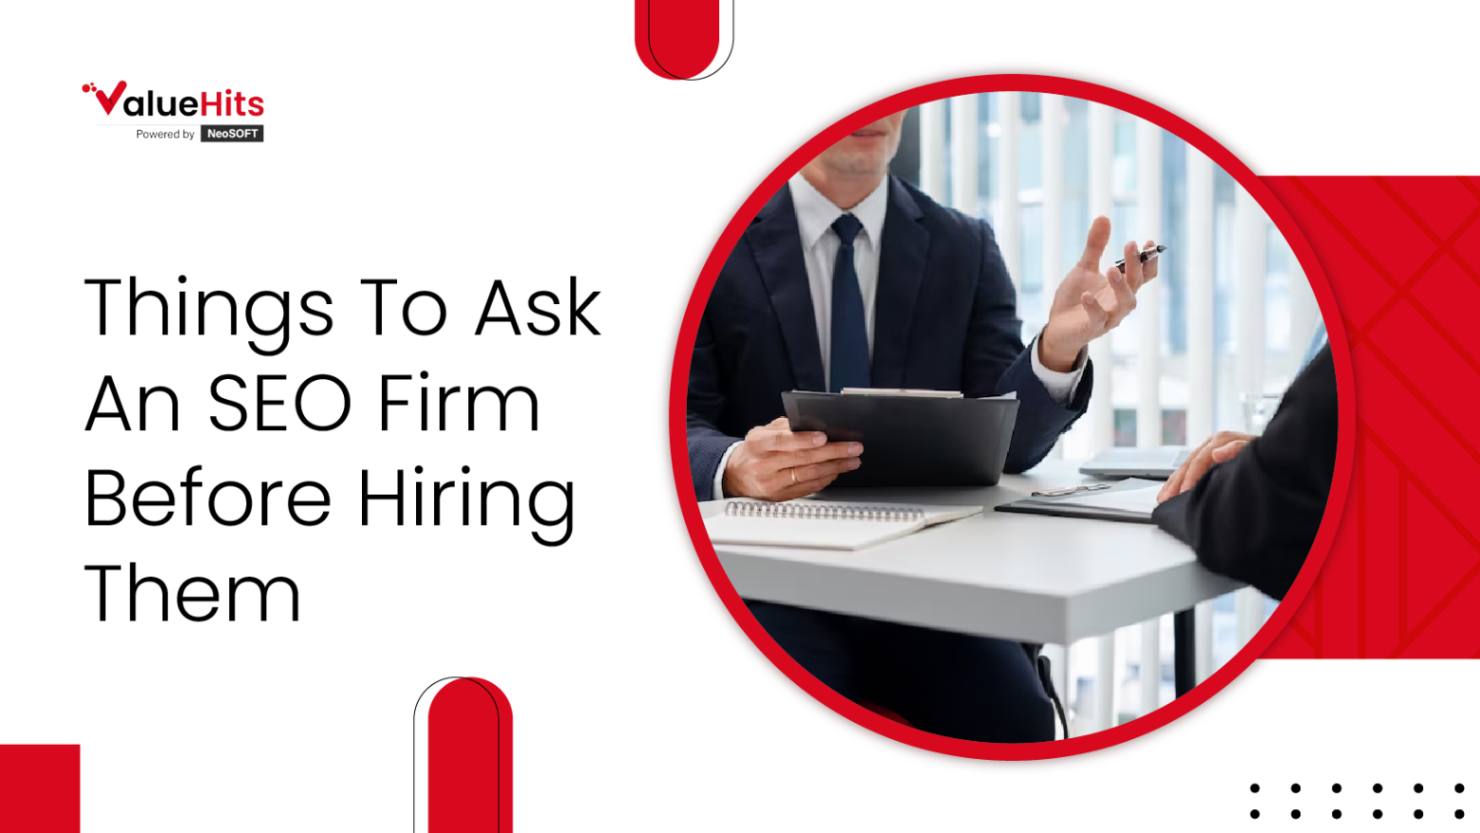 Things To Ask An SEO Firm Before Hiring Them